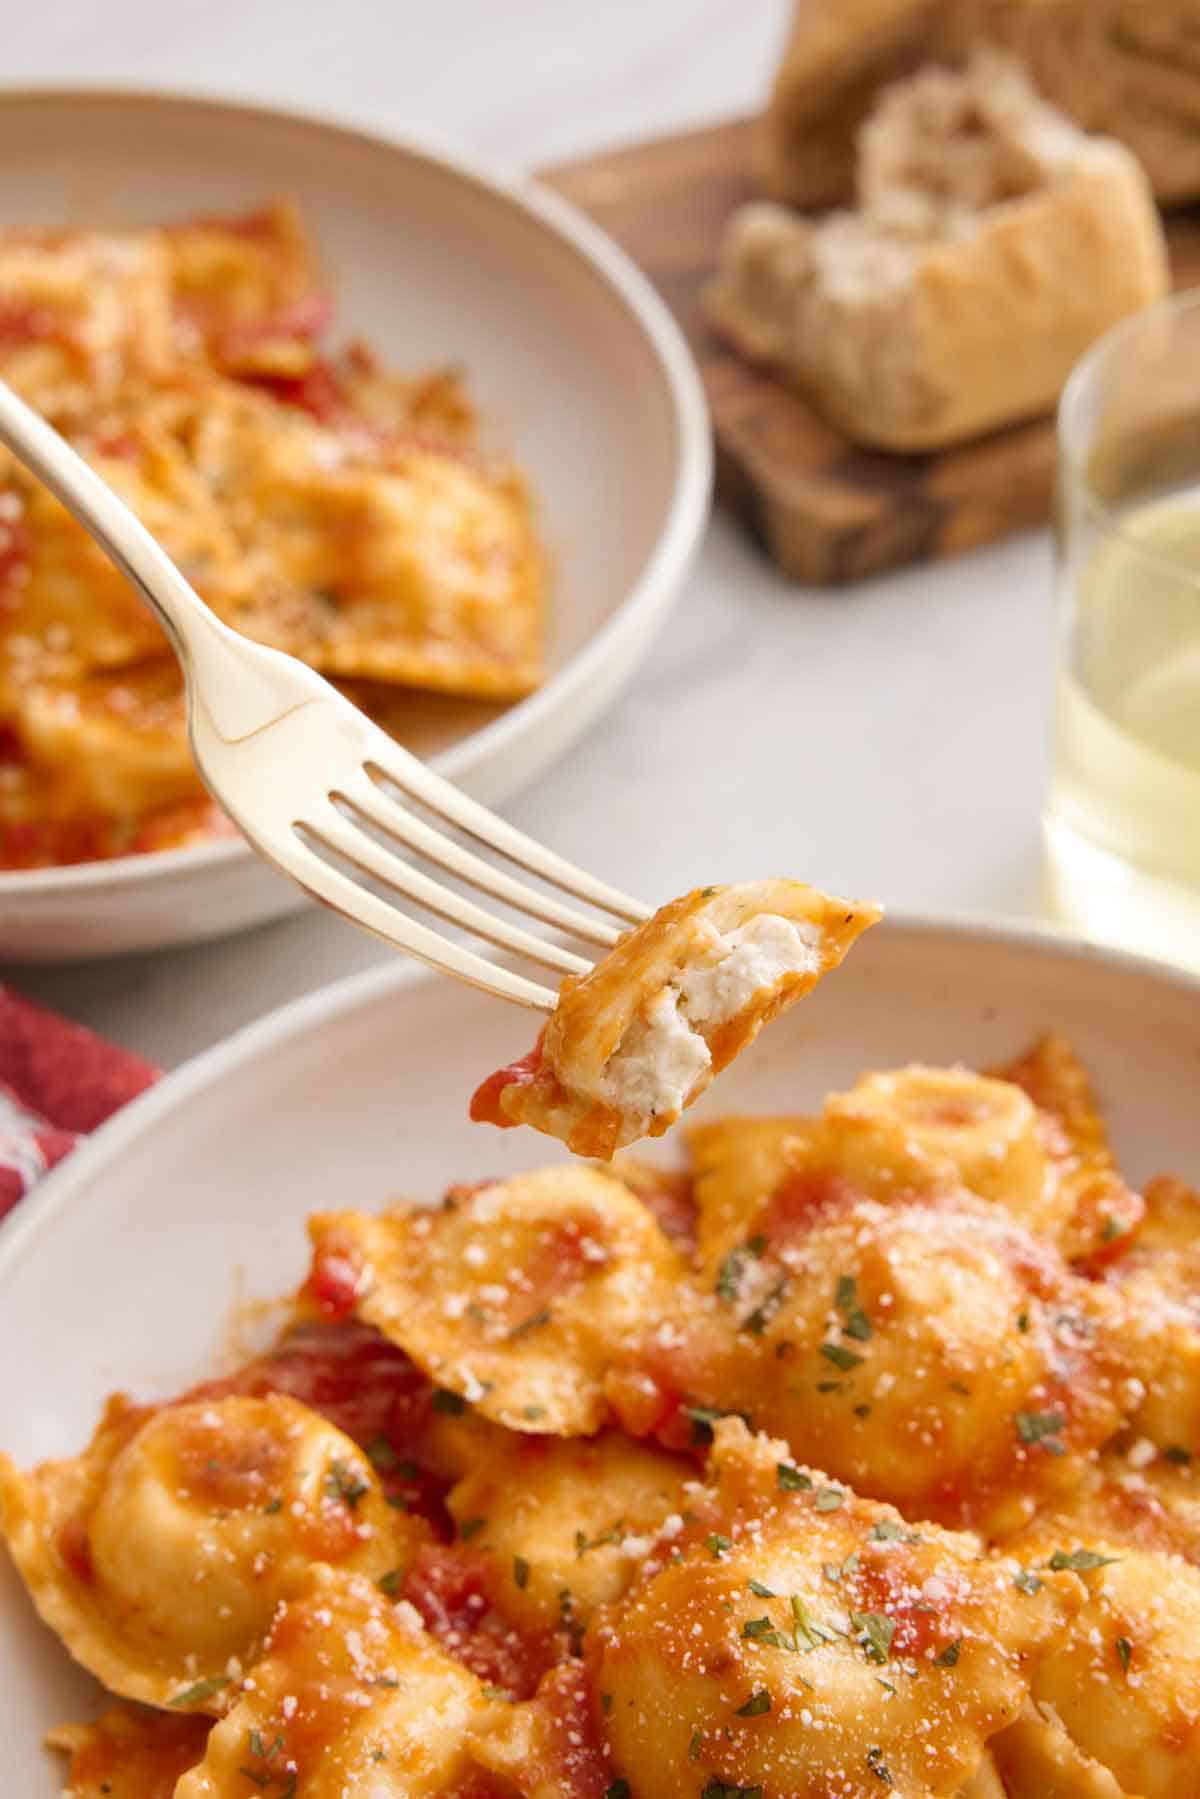 A fork lifting up a bite of cheese ravioli tossed in tomato sauce and herb garnish. A second plate, torn bread, and wine in the background.